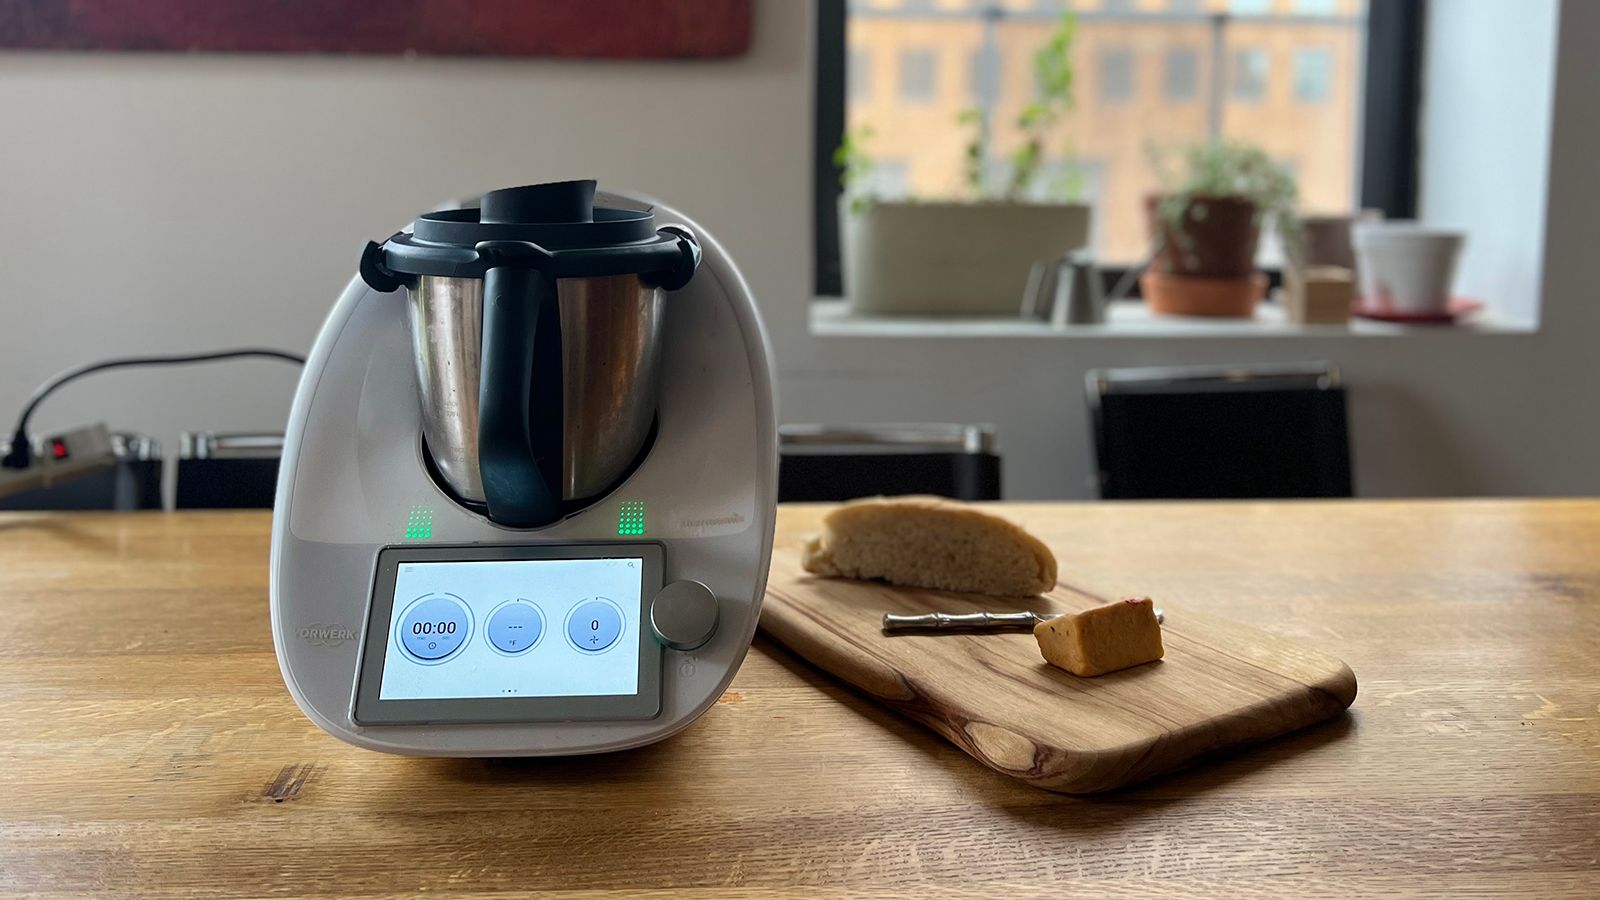 Thermomix TM6 review